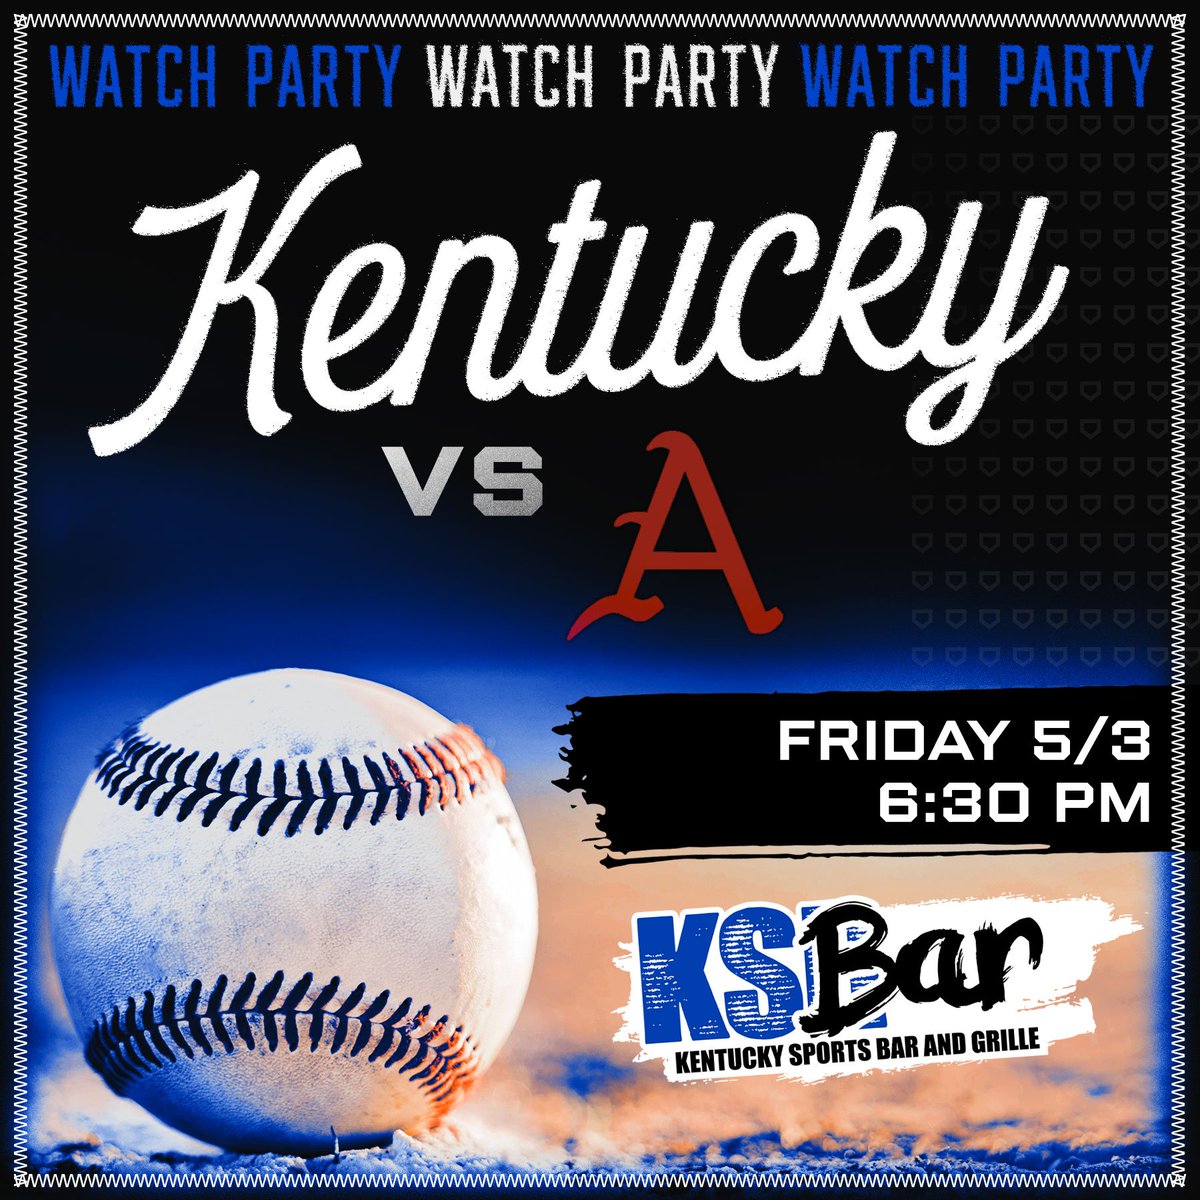 Reserved seating at KPP is sold out so your next best seat to watch the Cats is right here (as long as the weather plays nice). Bourbon Friday specials with pours as low as $4 and happy hour 2-5 so if you have tix, stop in before you head over to get in the proper mood.